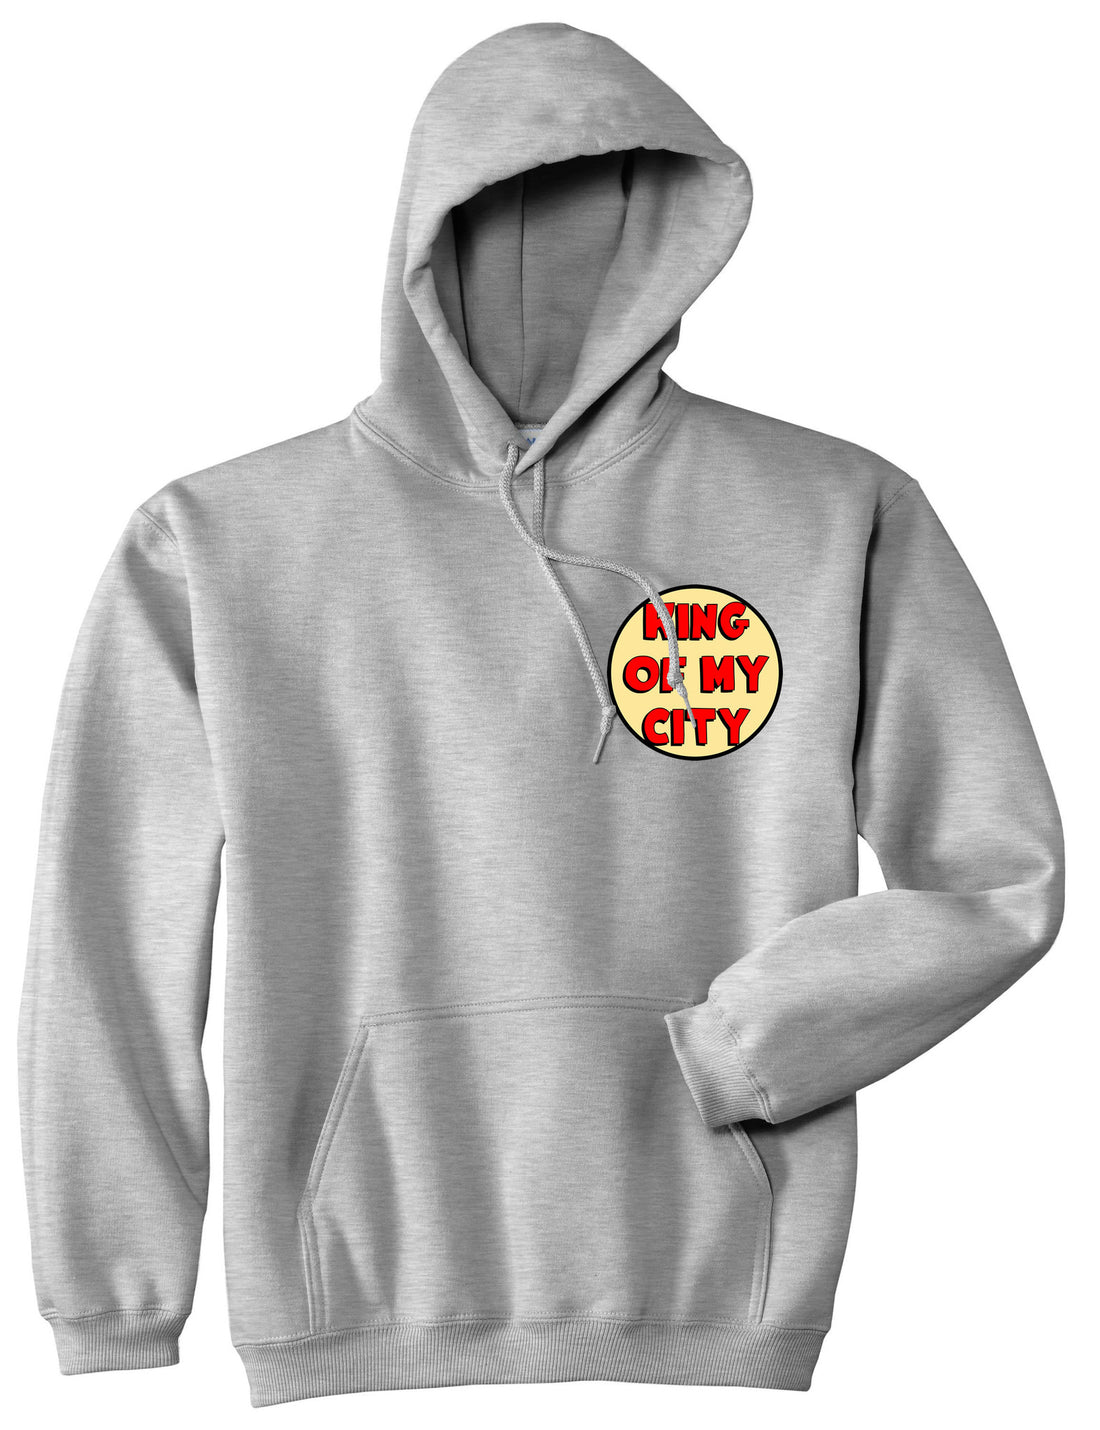 King Of My City Chest Logo Boys Kids Pullover Hoodie Hoody in Grey by Kings Of NY